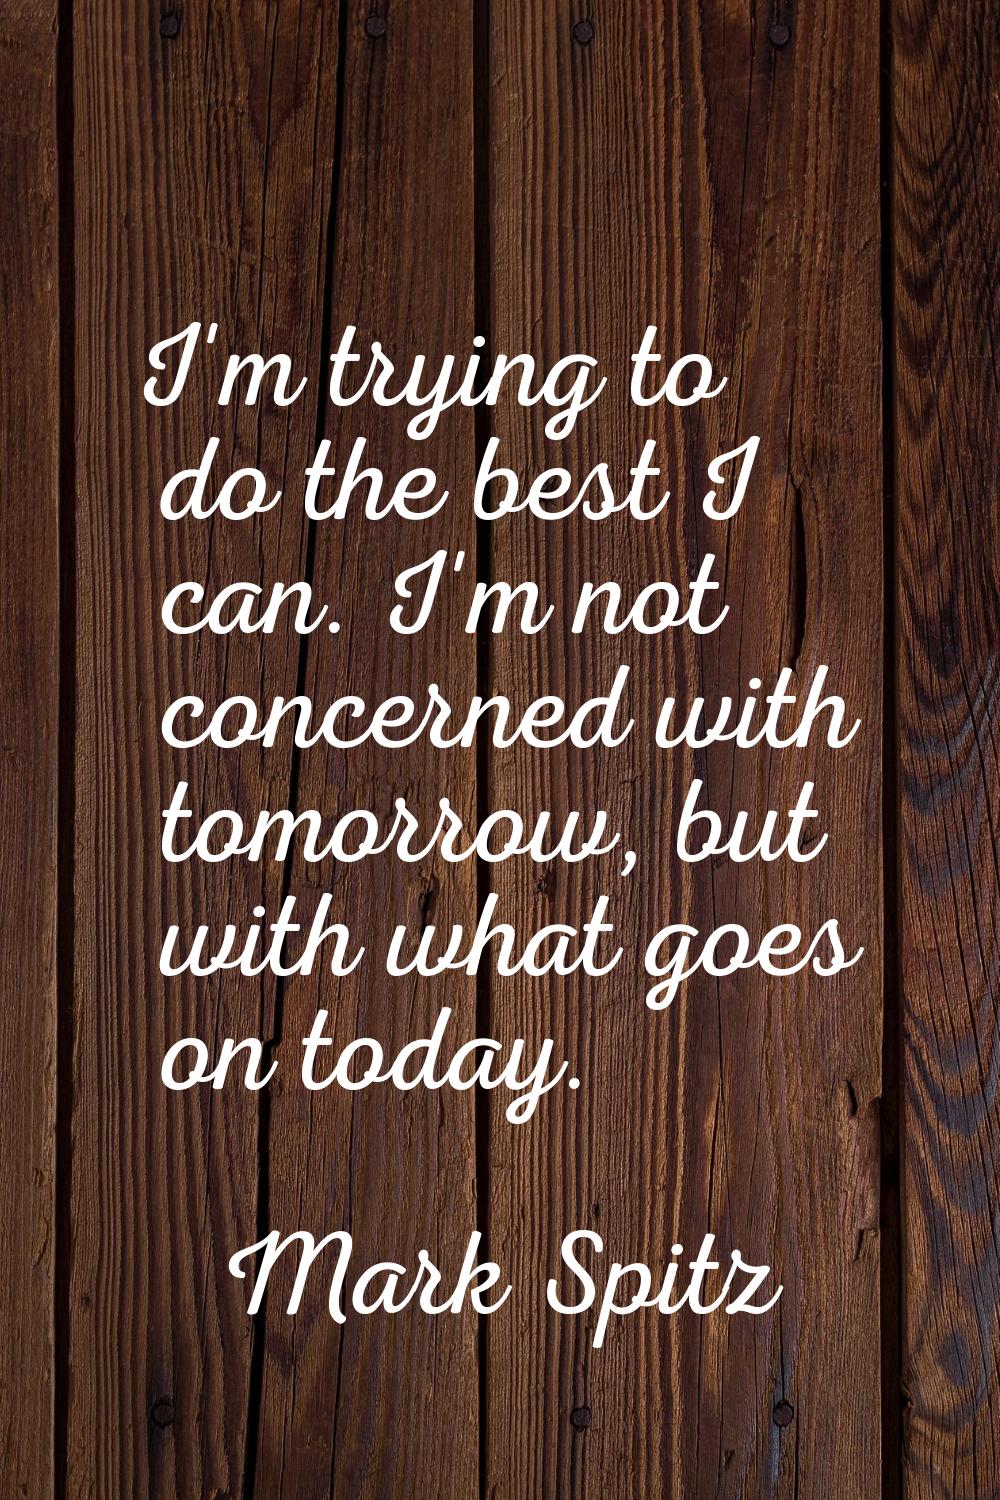 I'm trying to do the best I can. I'm not concerned with tomorrow, but with what goes on today.